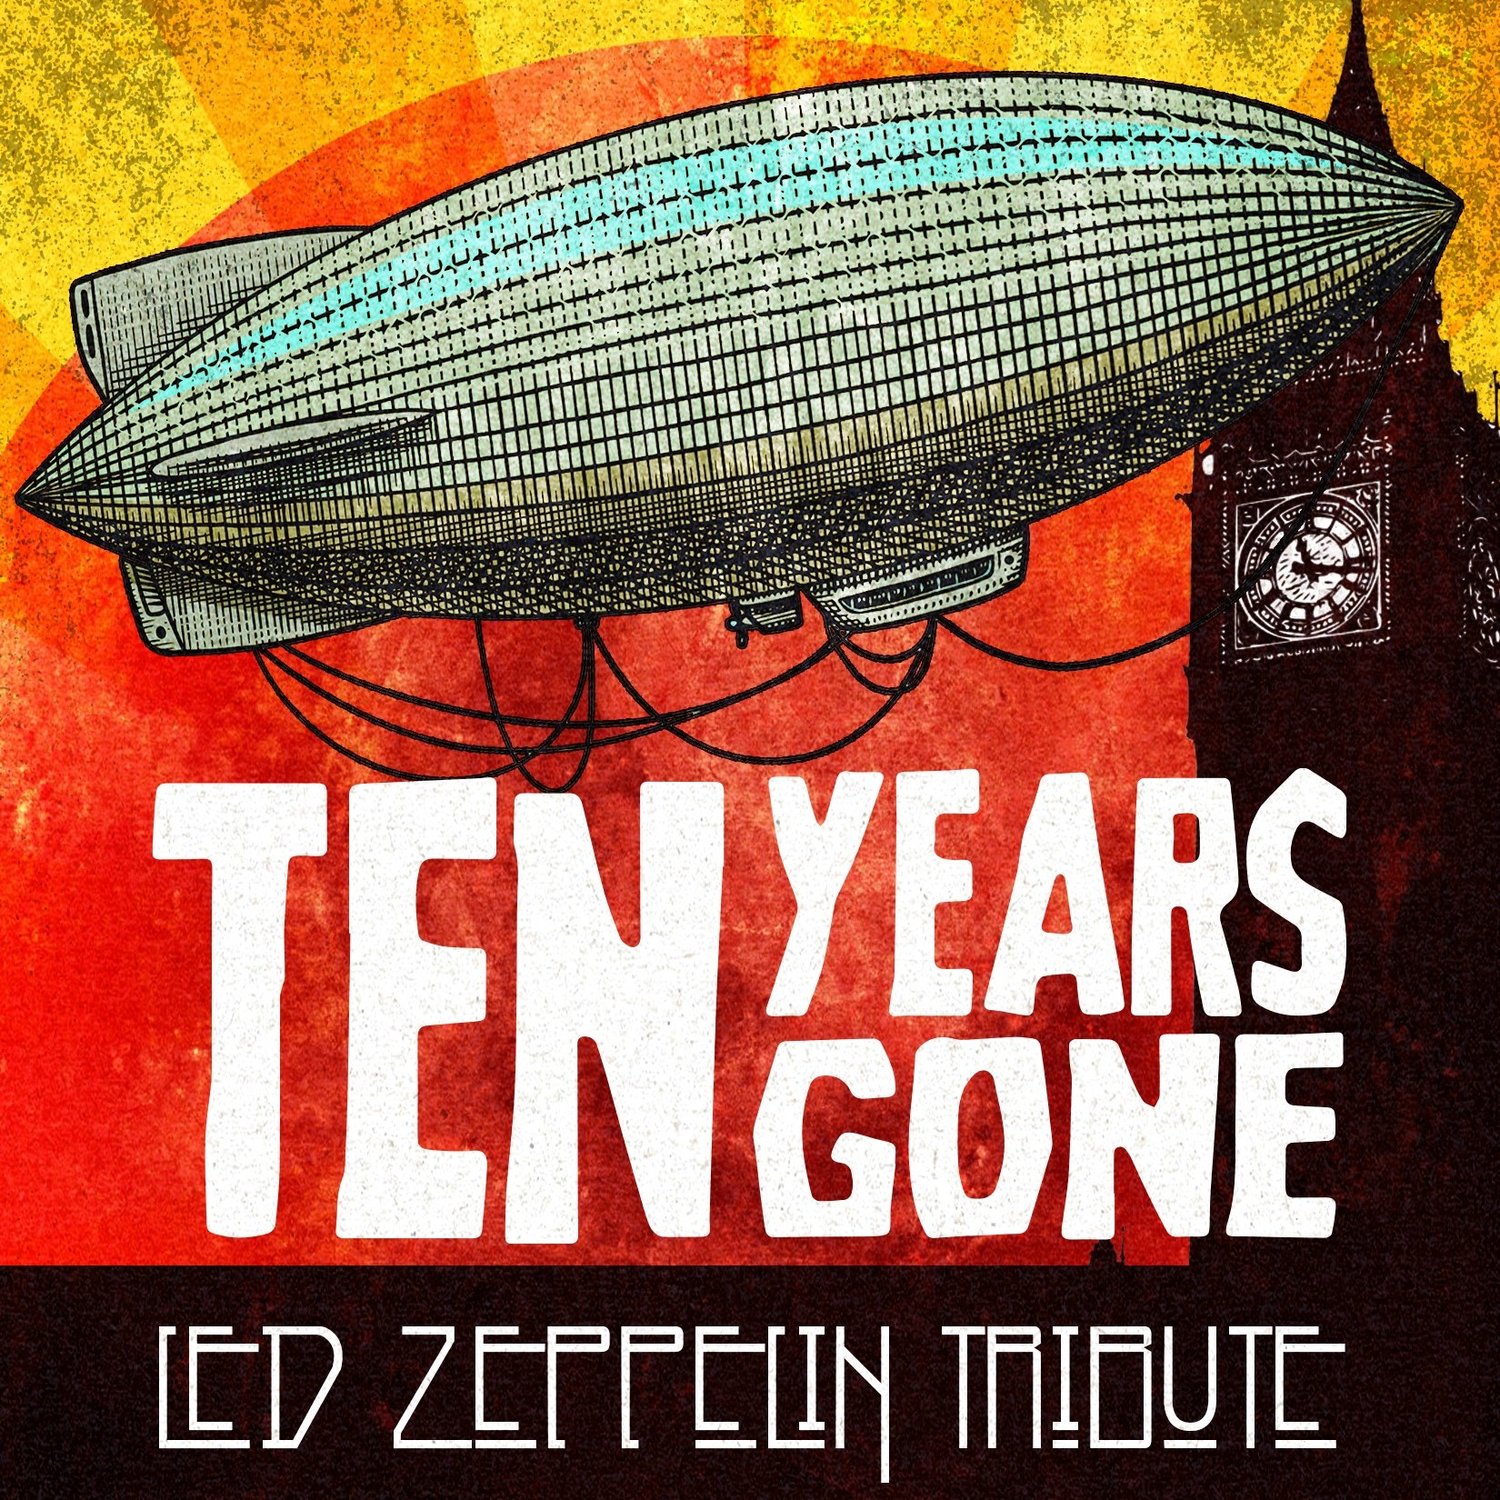 Welcome | Ten Years Gone: A Led Zeppelin Tribute Band